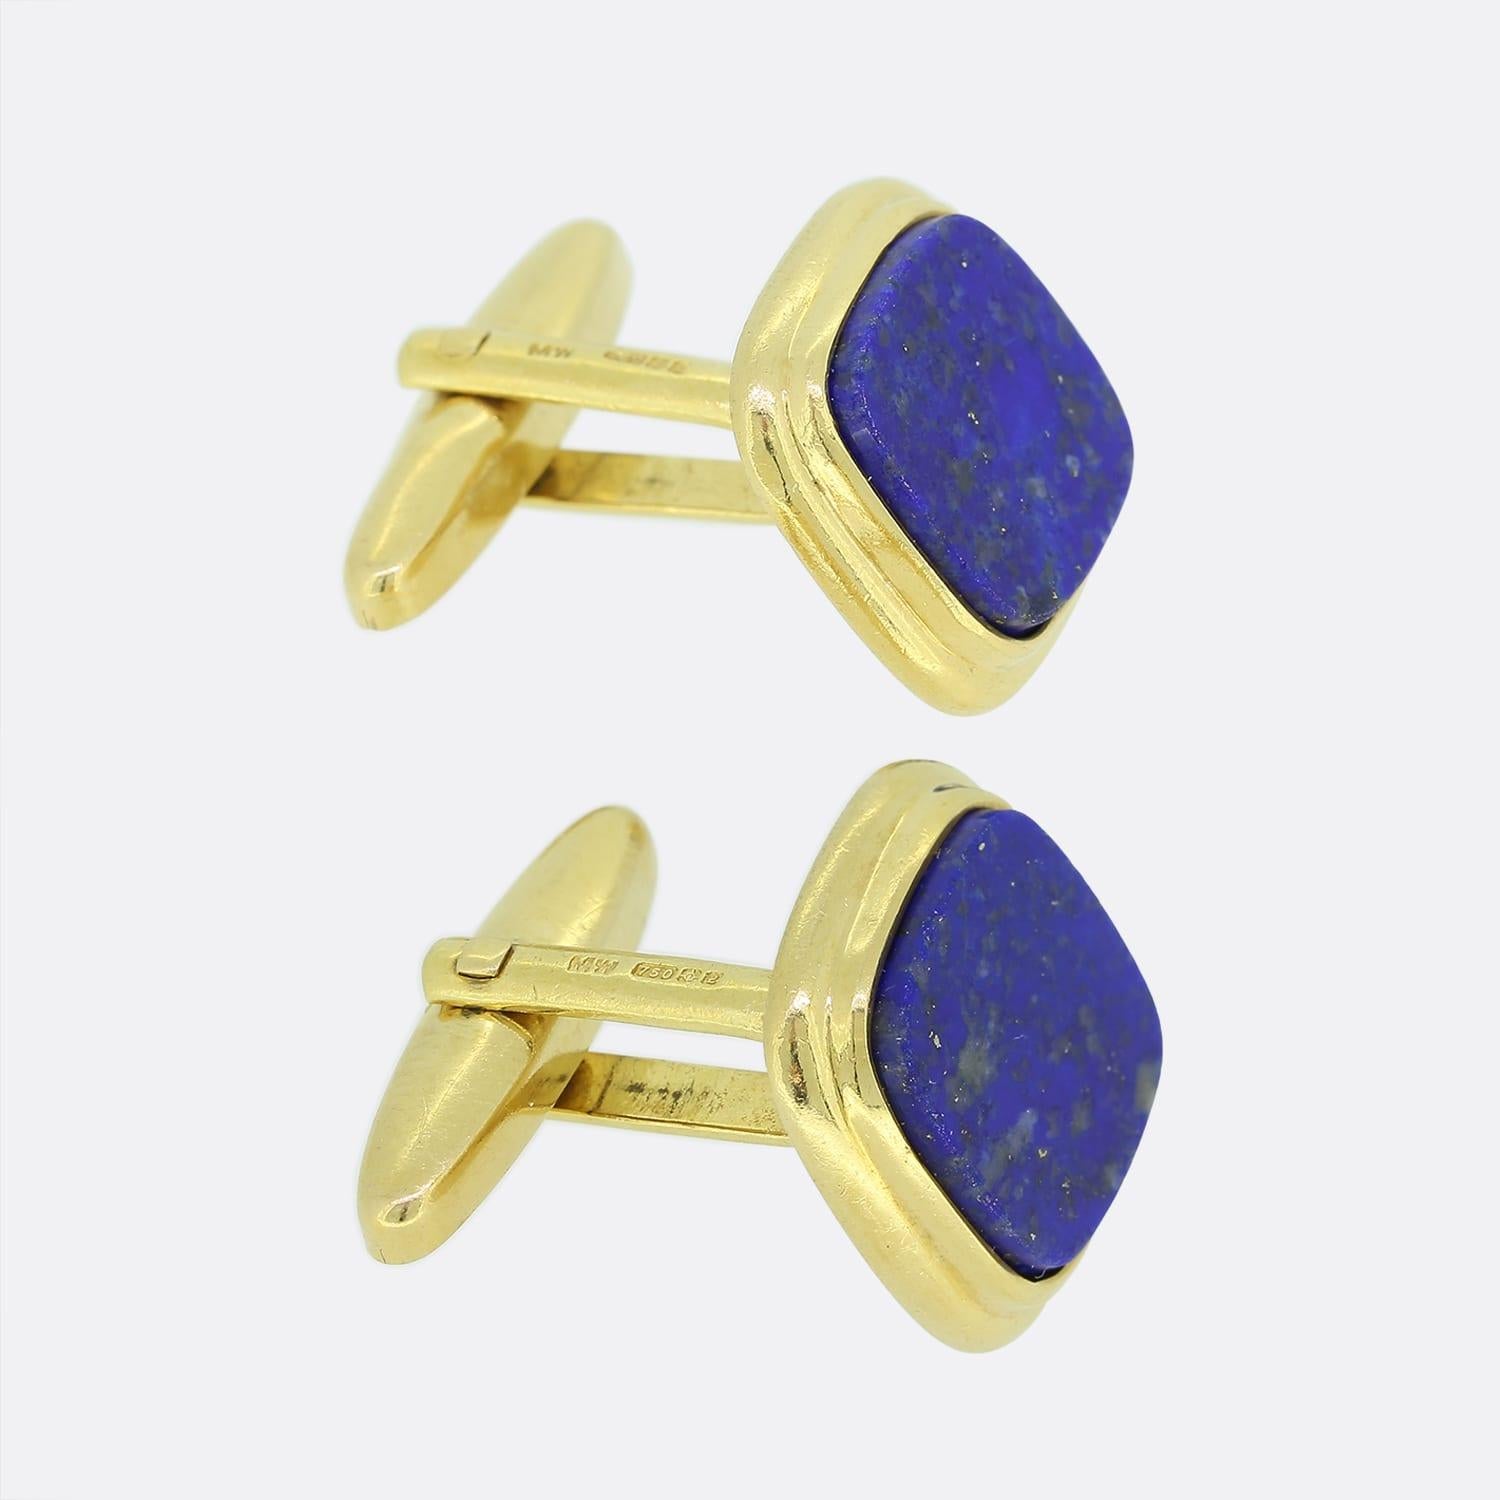 This is a vintage pair of 18ct yellow gold cufllinks. Each cufflink is set with a square-shaped lapis lazuli and has a stepped 18ct yellow gold border.

Condition: Used (Very Good)
Weight:16.3 grams
Face Dimensions: 15.5mm x 15.5mm
Hallmarked: Yes